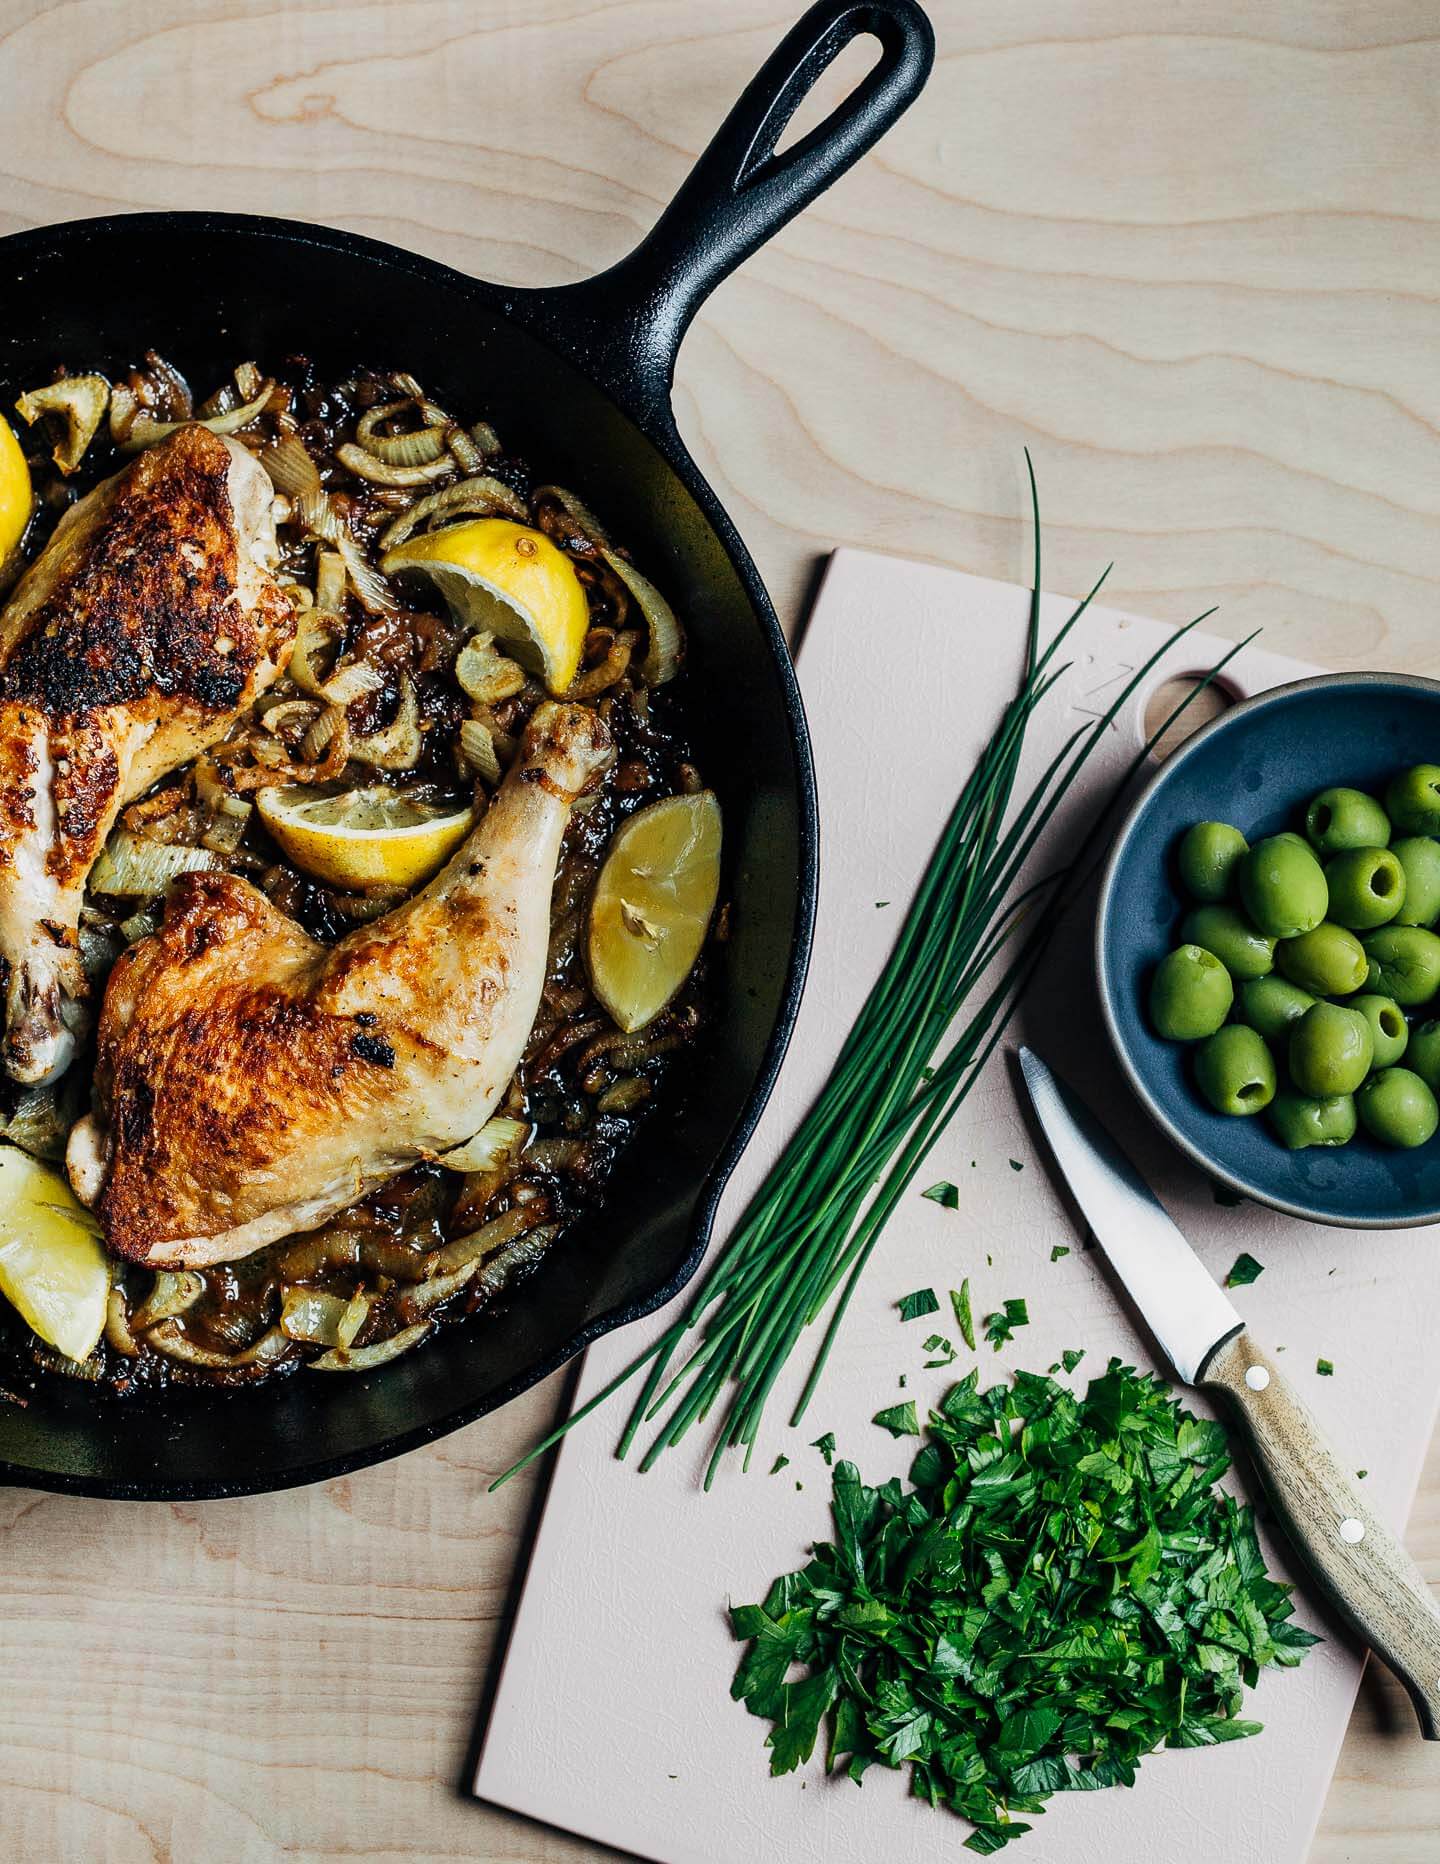 A cast iron skillet with roasted chicken and a cutting board with herbs.